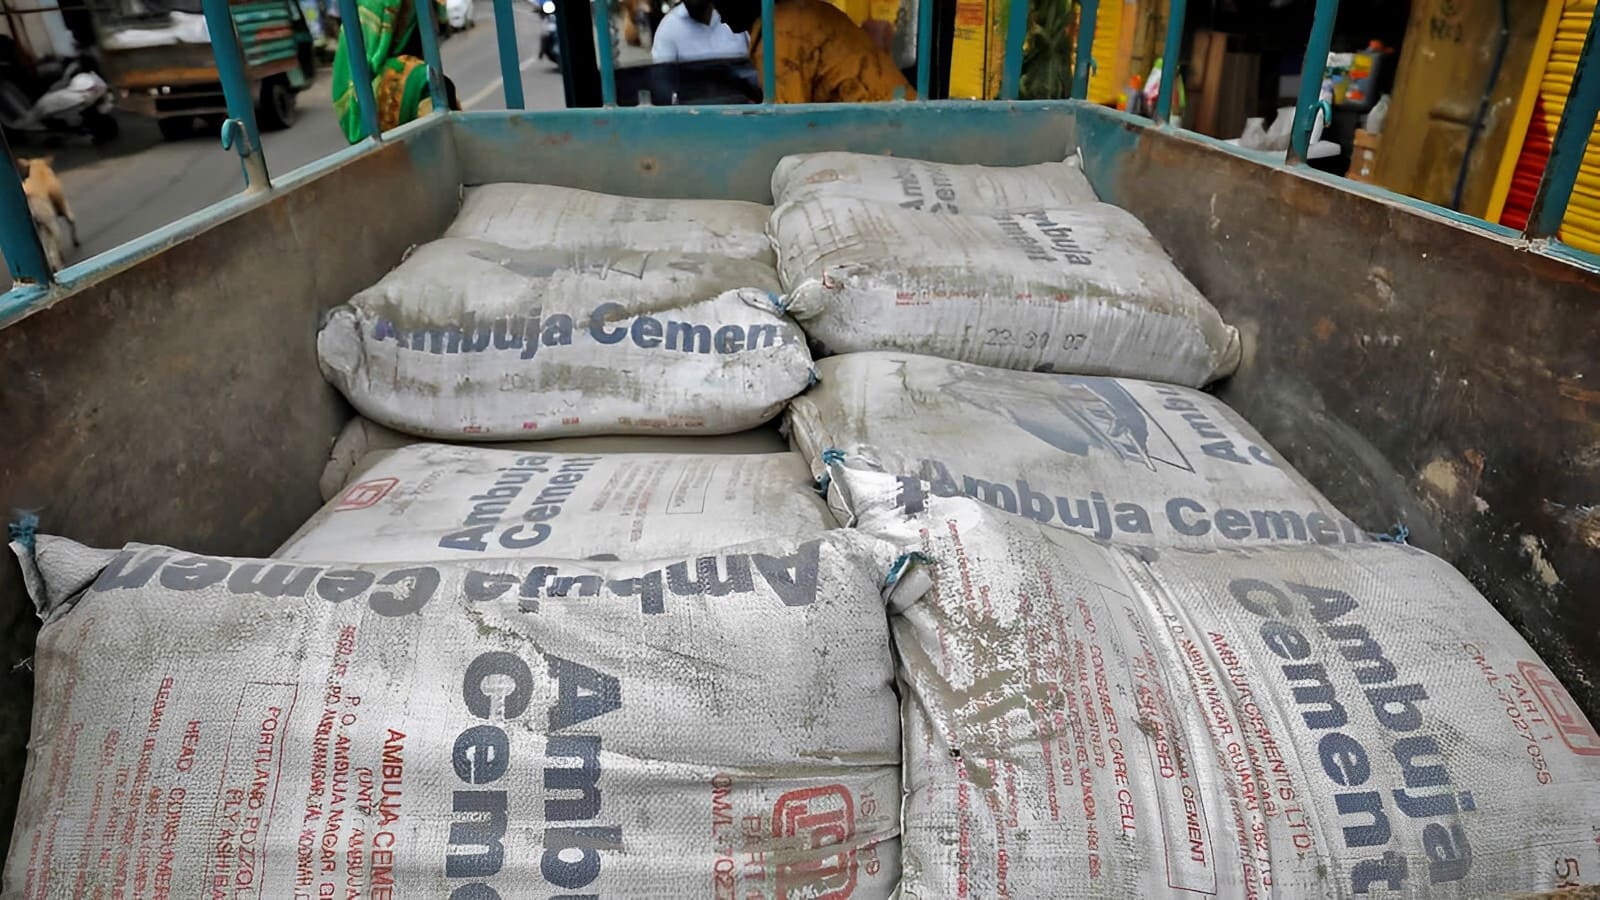 Ambuja Cements forms three subsidiaries to enhance aircraft and cement business